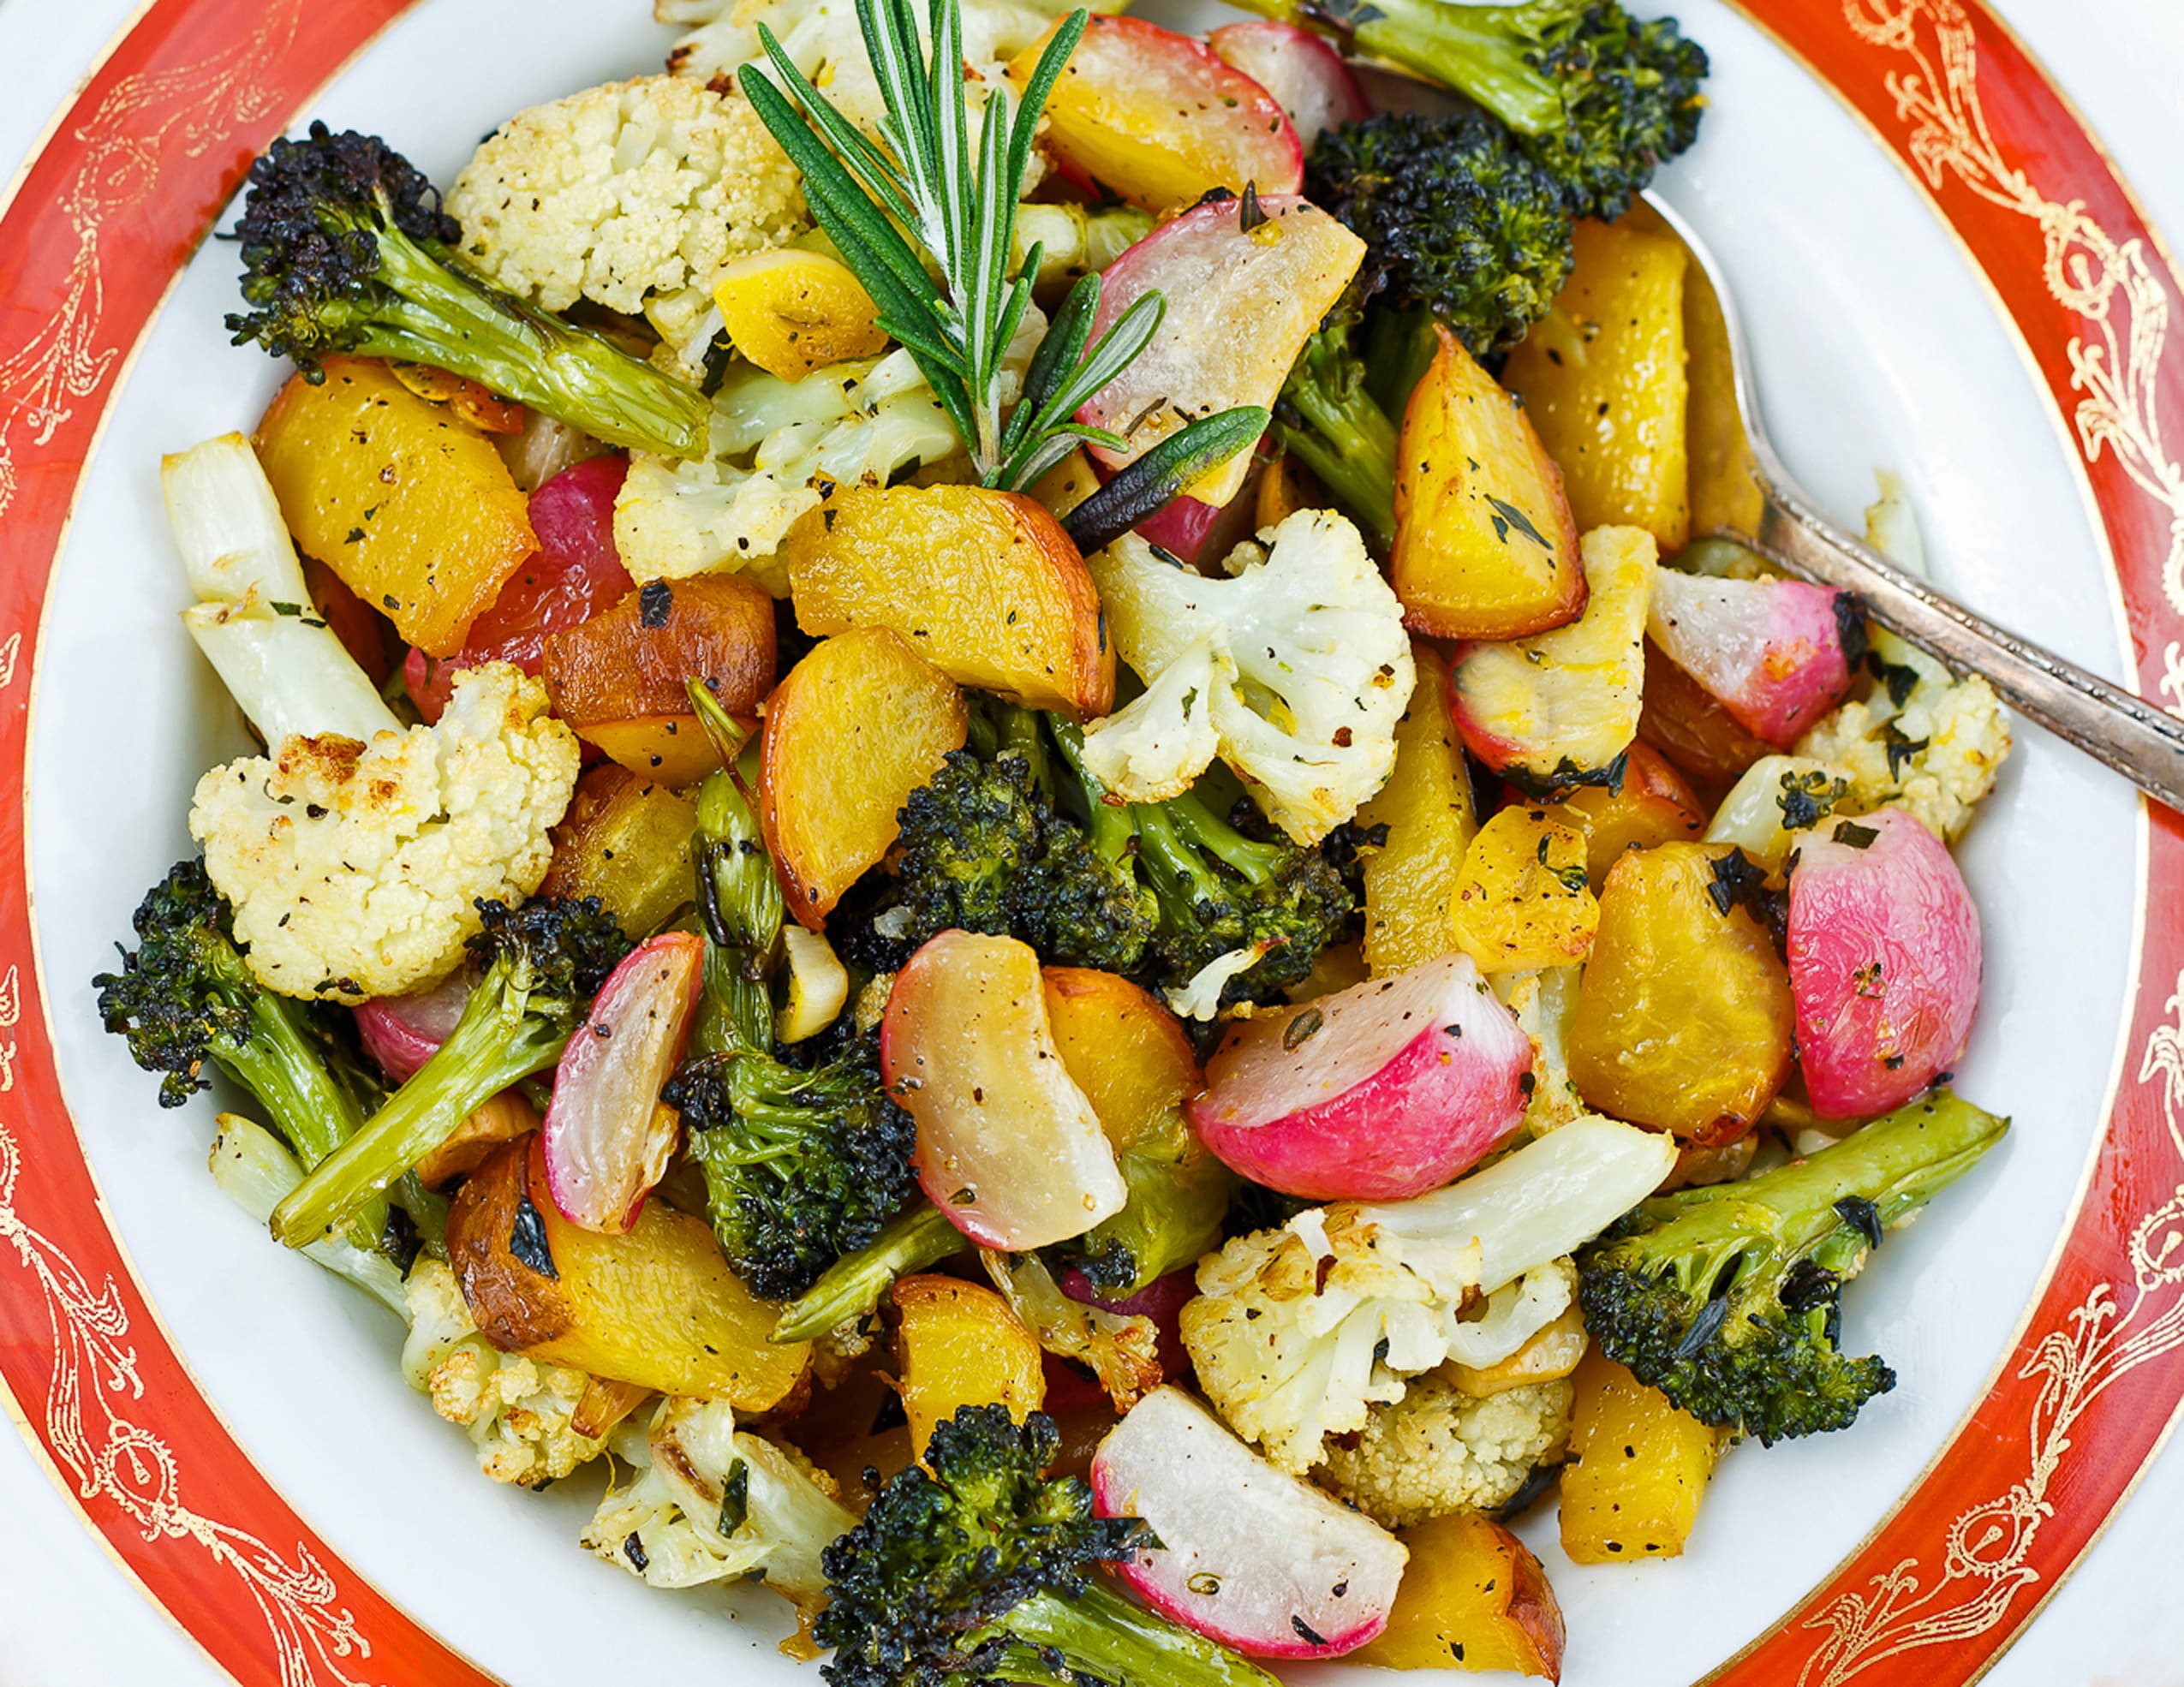 Roasted Vegetable Medley with Rosemary and Thyme